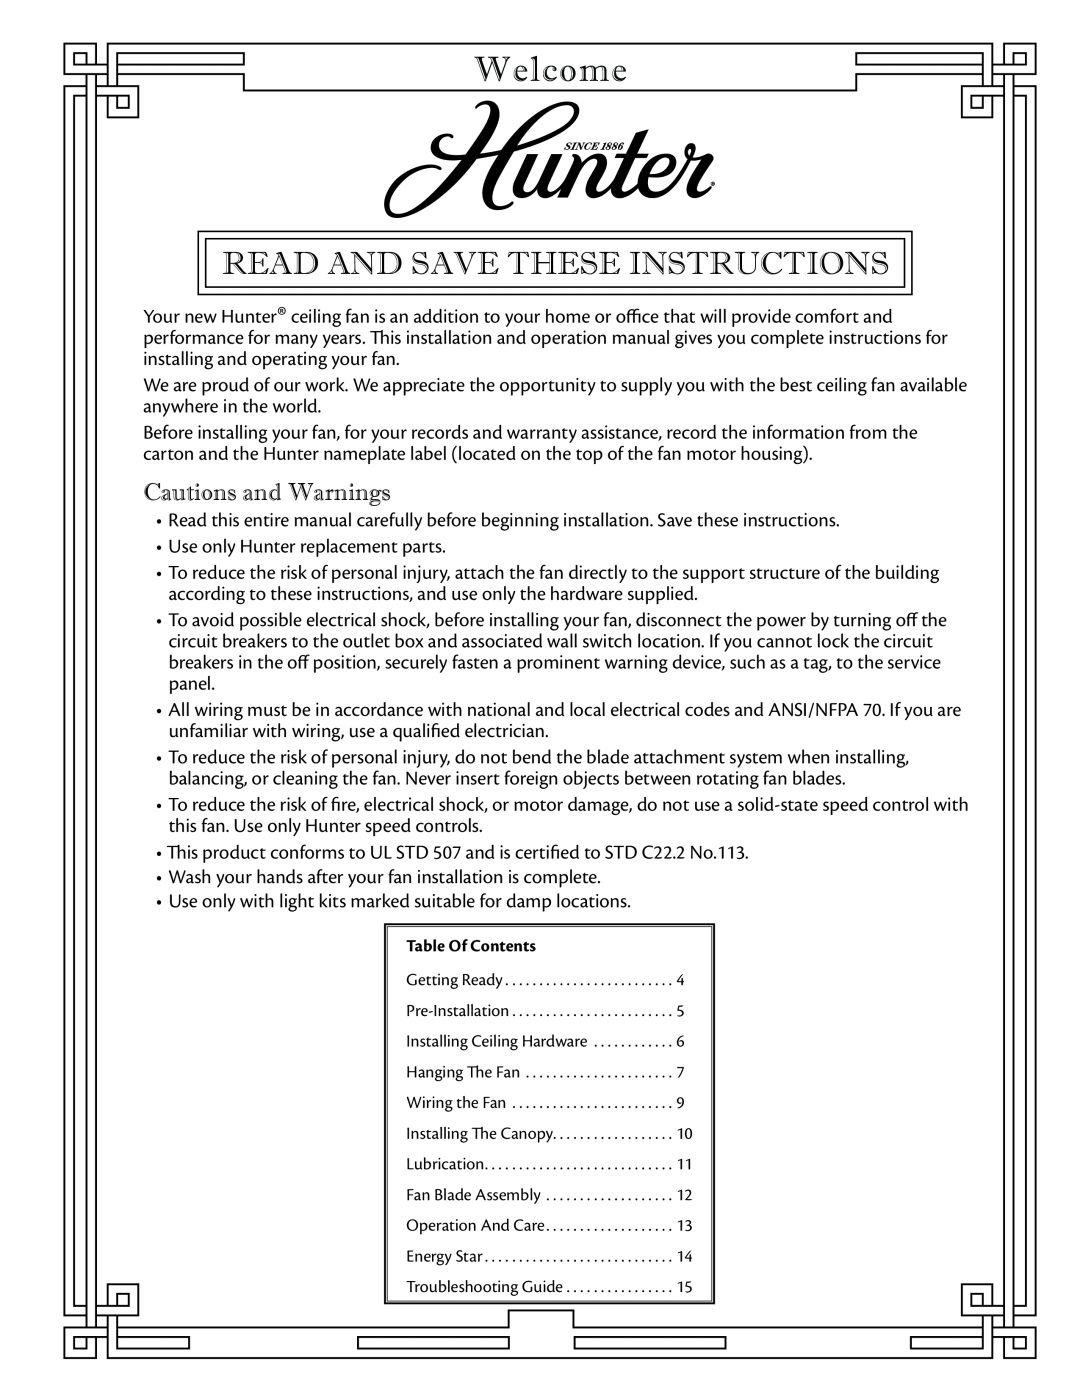 Hunter Fan 23838 warranty Welcome, Cautions and Warnings, Read And Save These Instructions 